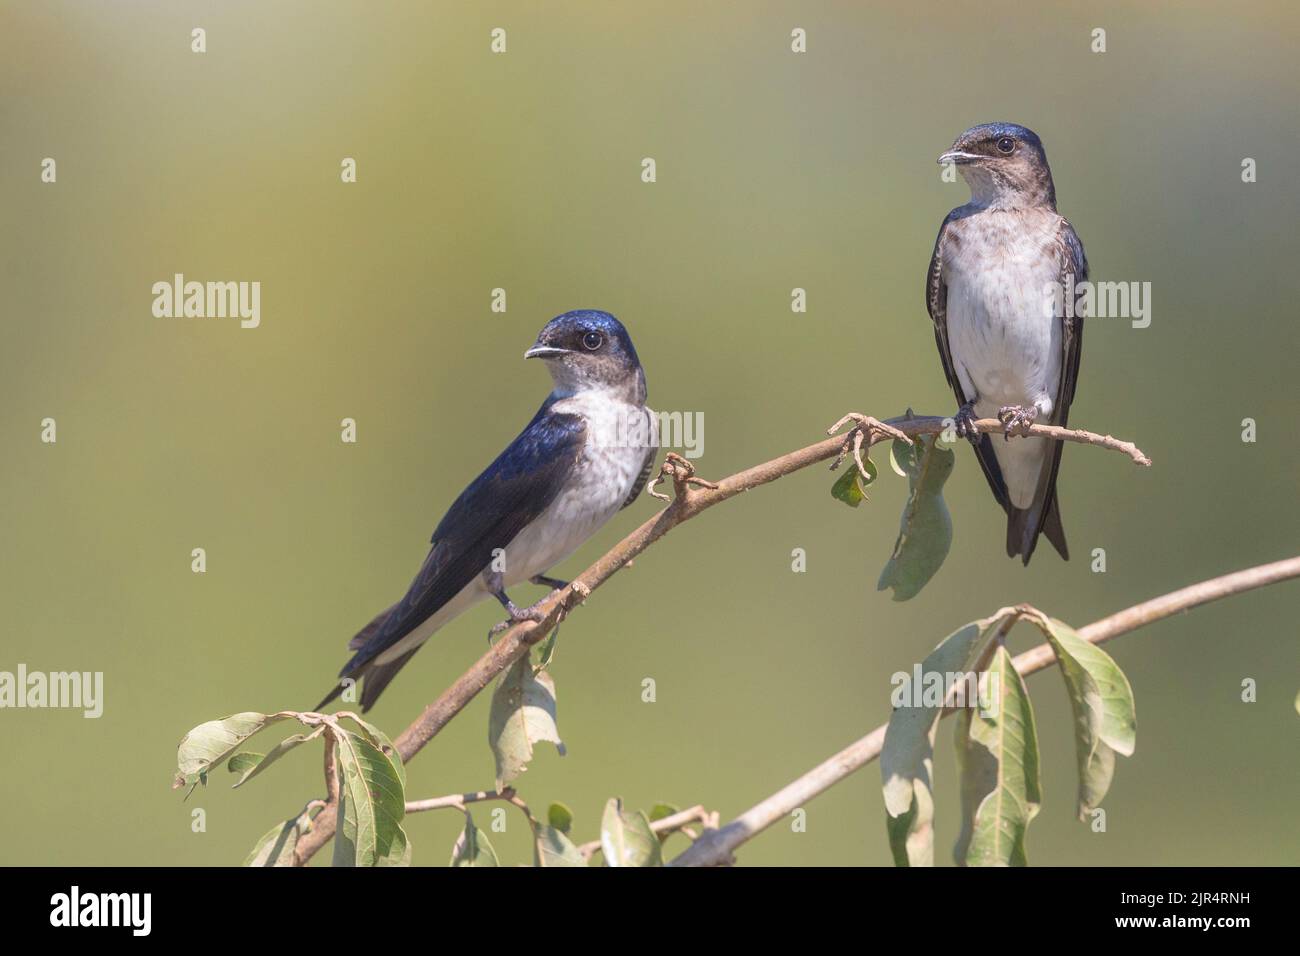 grey-breasted martin (Progne chalybea), two grey-breasted martins perched on a twig, Brazil, Serra da Canastra National Park Stock Photo